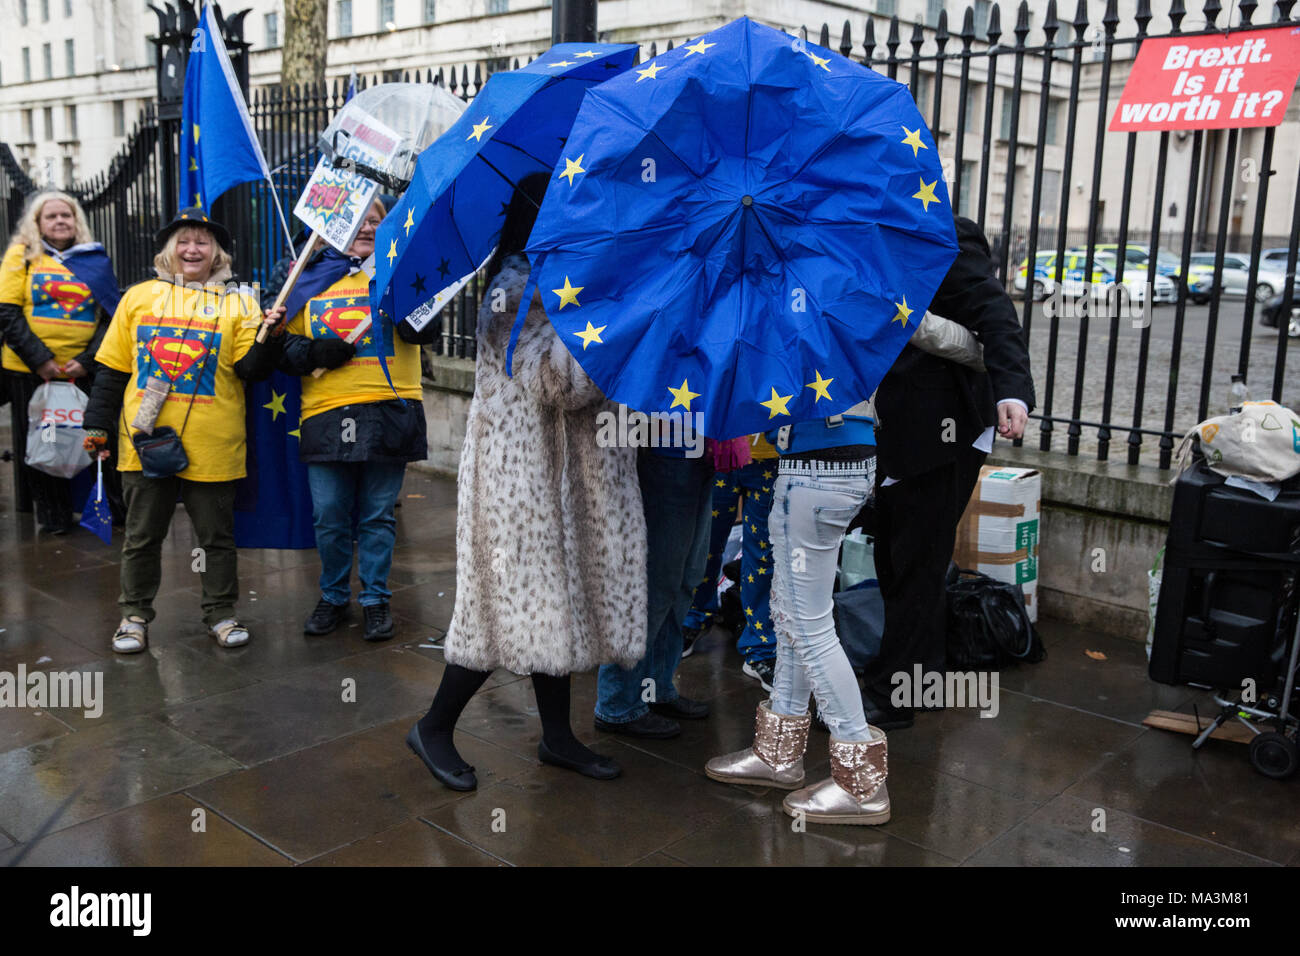 London, UK. 29th March, 2018. Pro-EU activists protest opposite Downing Street to mark the first anniversary of the triggering of Article 50 and a year before the UK’s exit from the European Union, or Brexit, is scheduled to take place. Protesters dressed as ‘EU super heroes’ and ‘Brexit villains’. Credit: Mark Kerrison/Alamy Live News Stock Photo